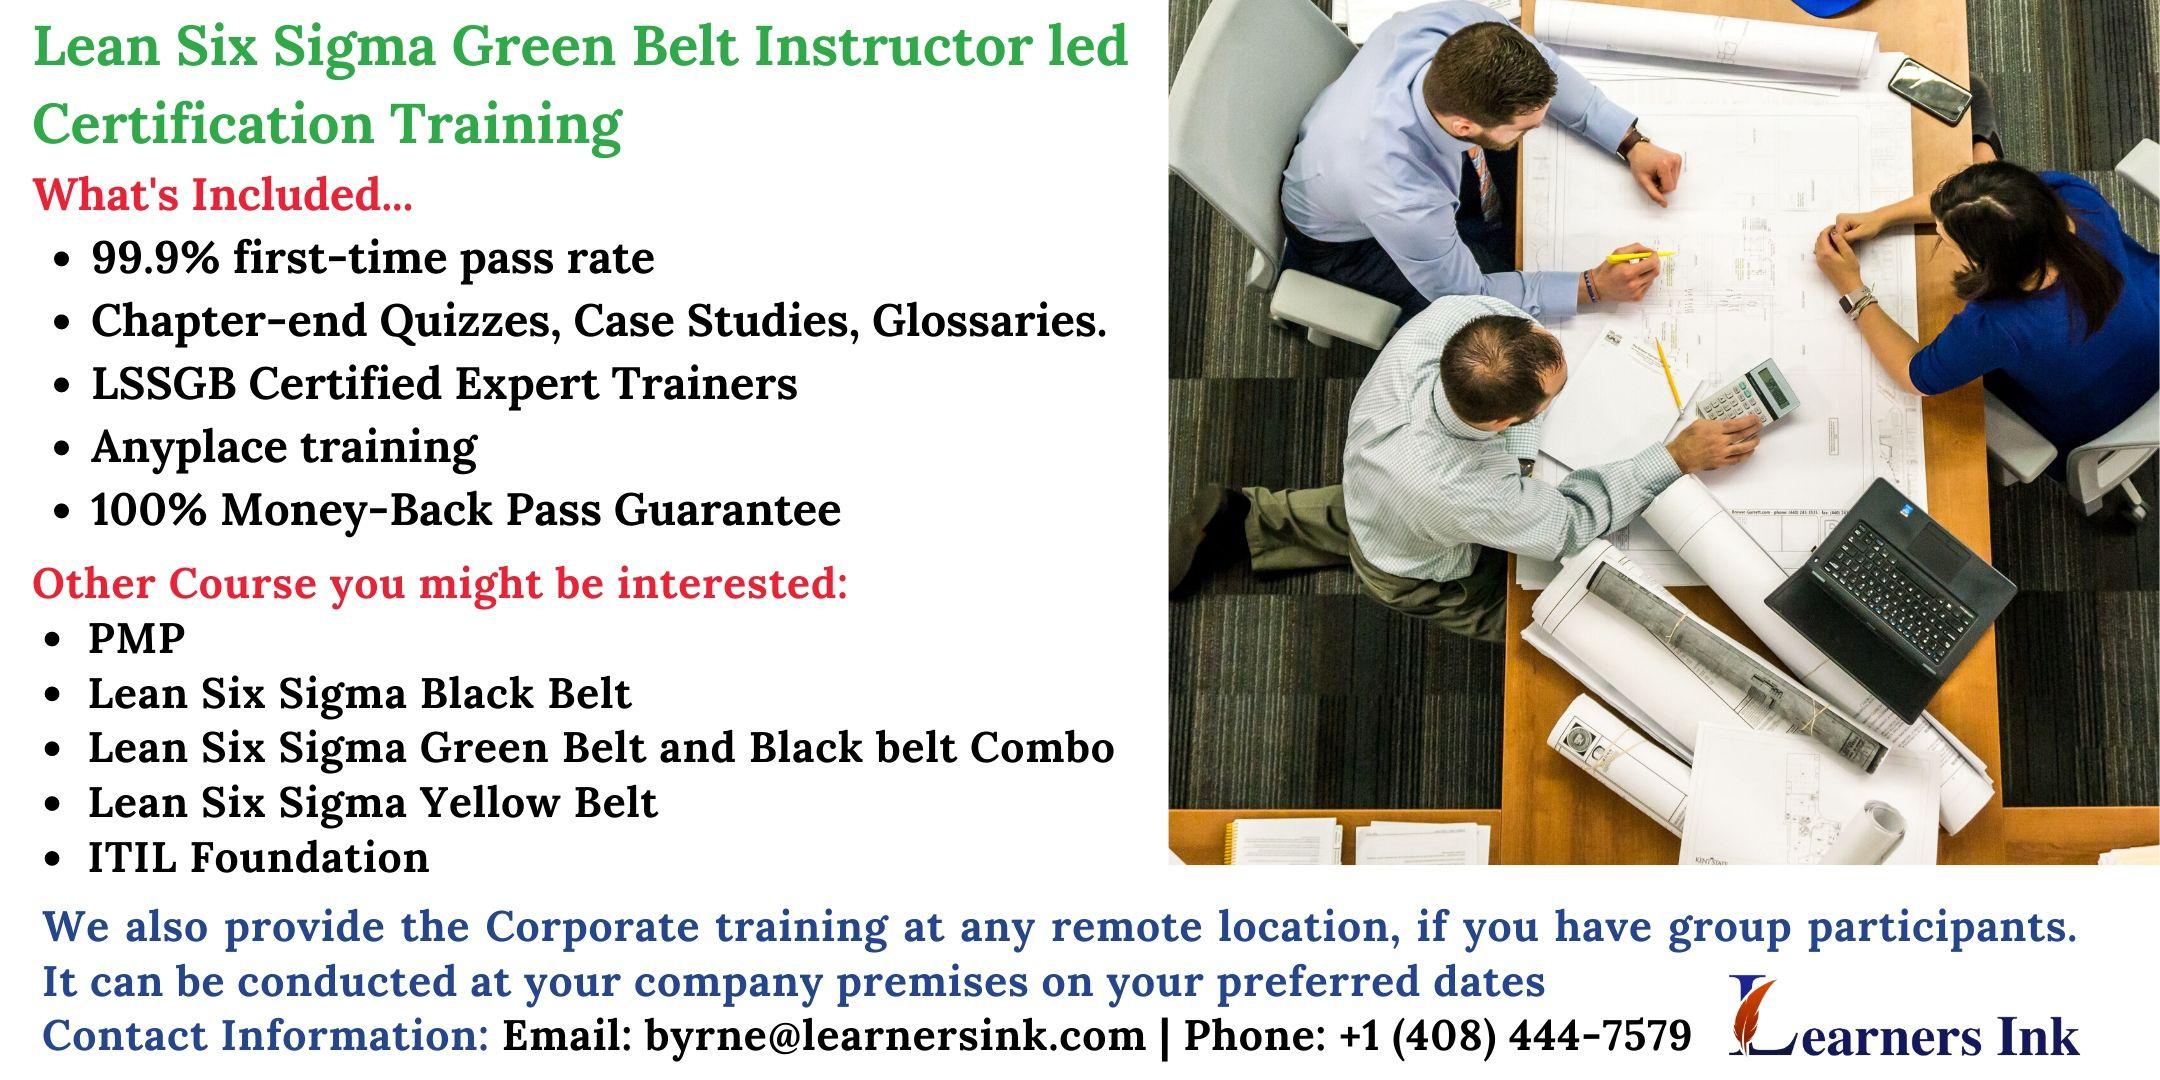 Lean Six Sigma Green Belt Certification Training Course (LSSGB) in Inglewood